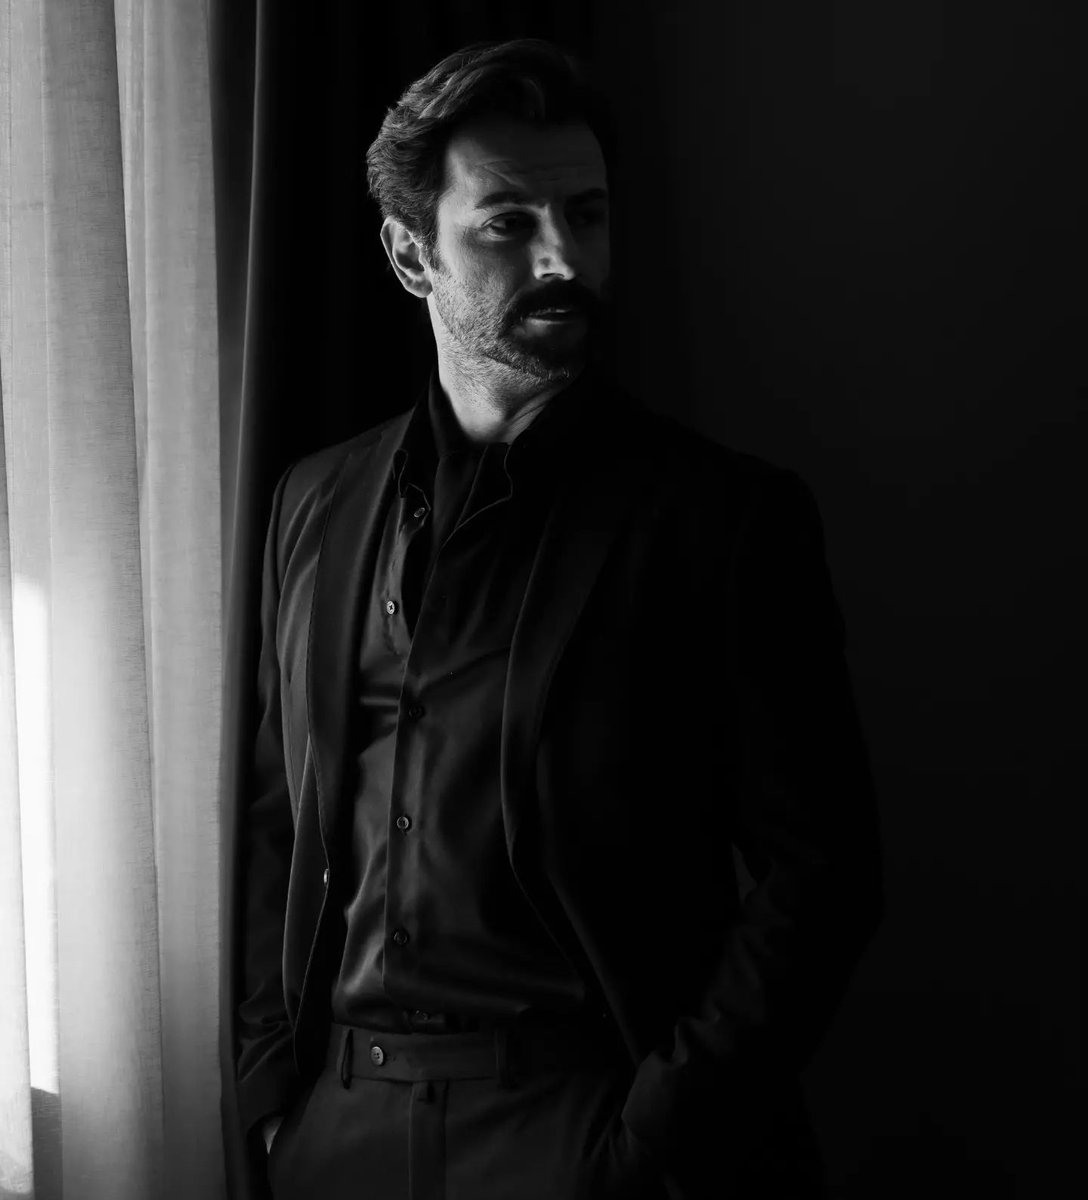 You are perfect 🖤👌🏻every colour suits you but black is made for you 🖤🖤🖤🤍🤍❤️‍🔥 #GökberkDemirci GökberkDemirci